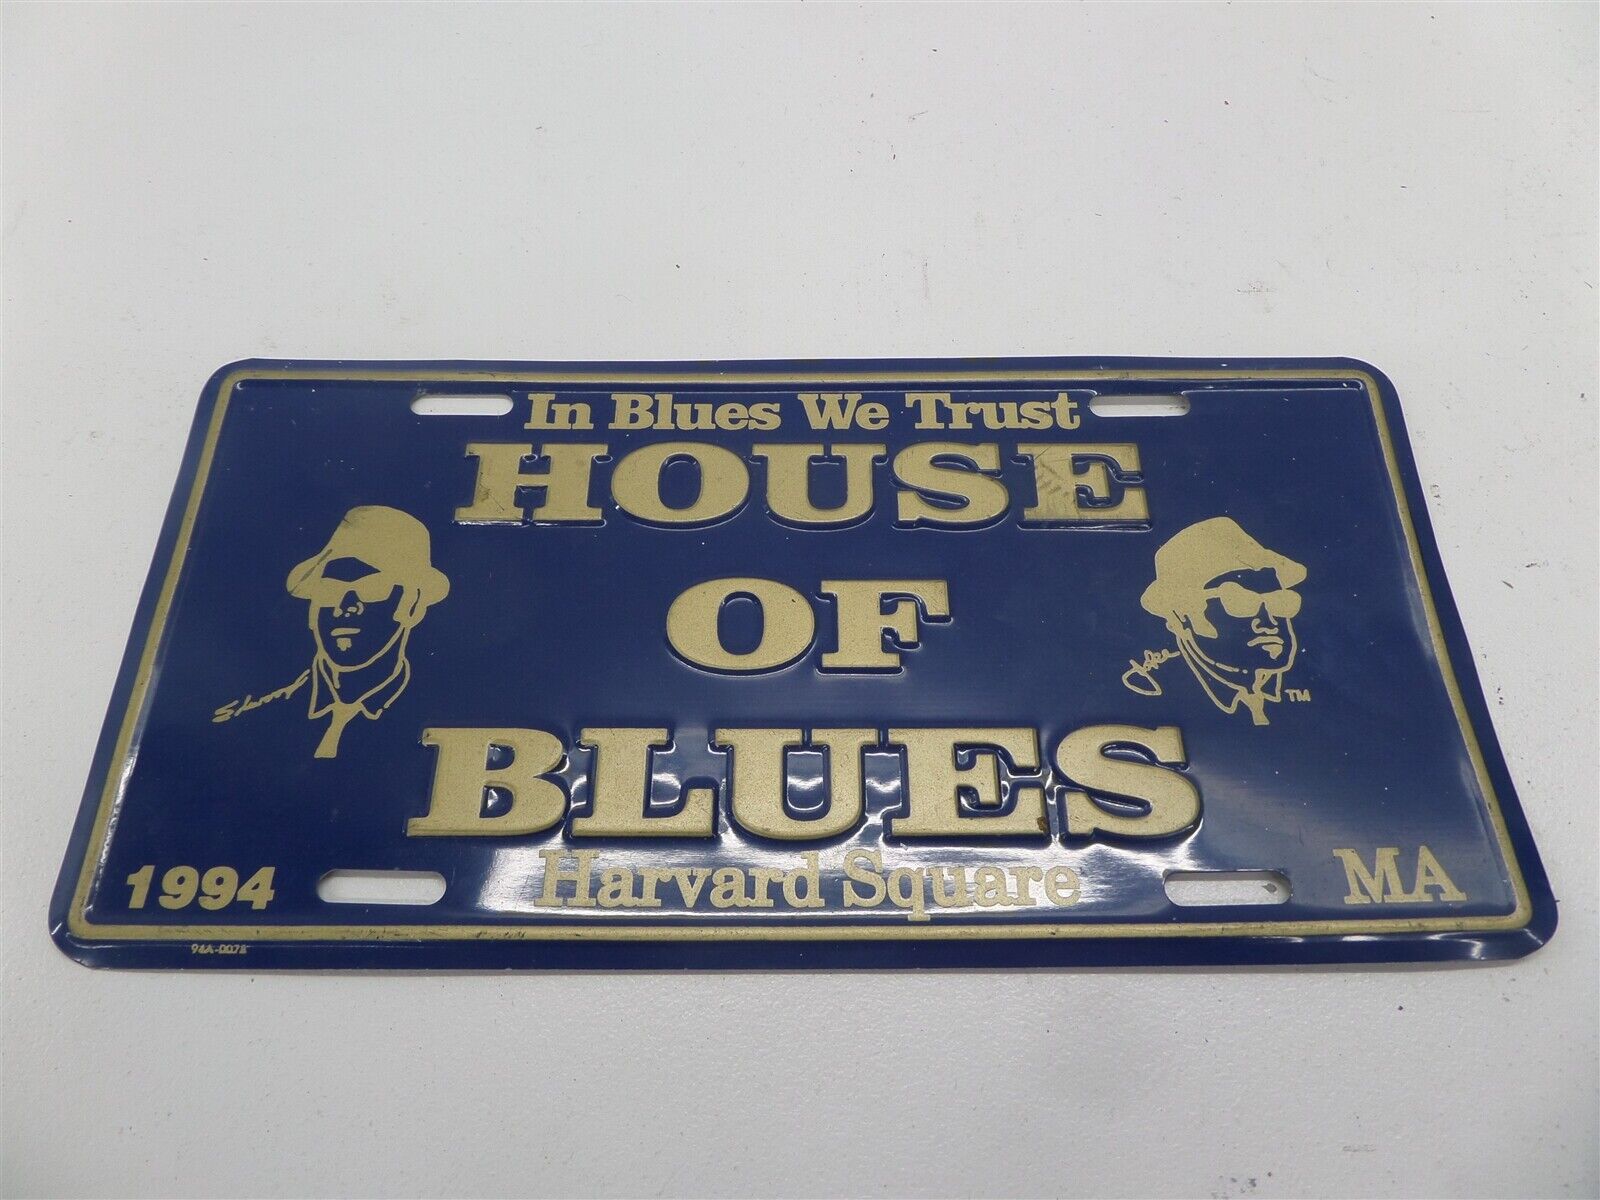 1994 House Of Blues In Blues We Trust License Plate - Harvard Square - 94A-0078